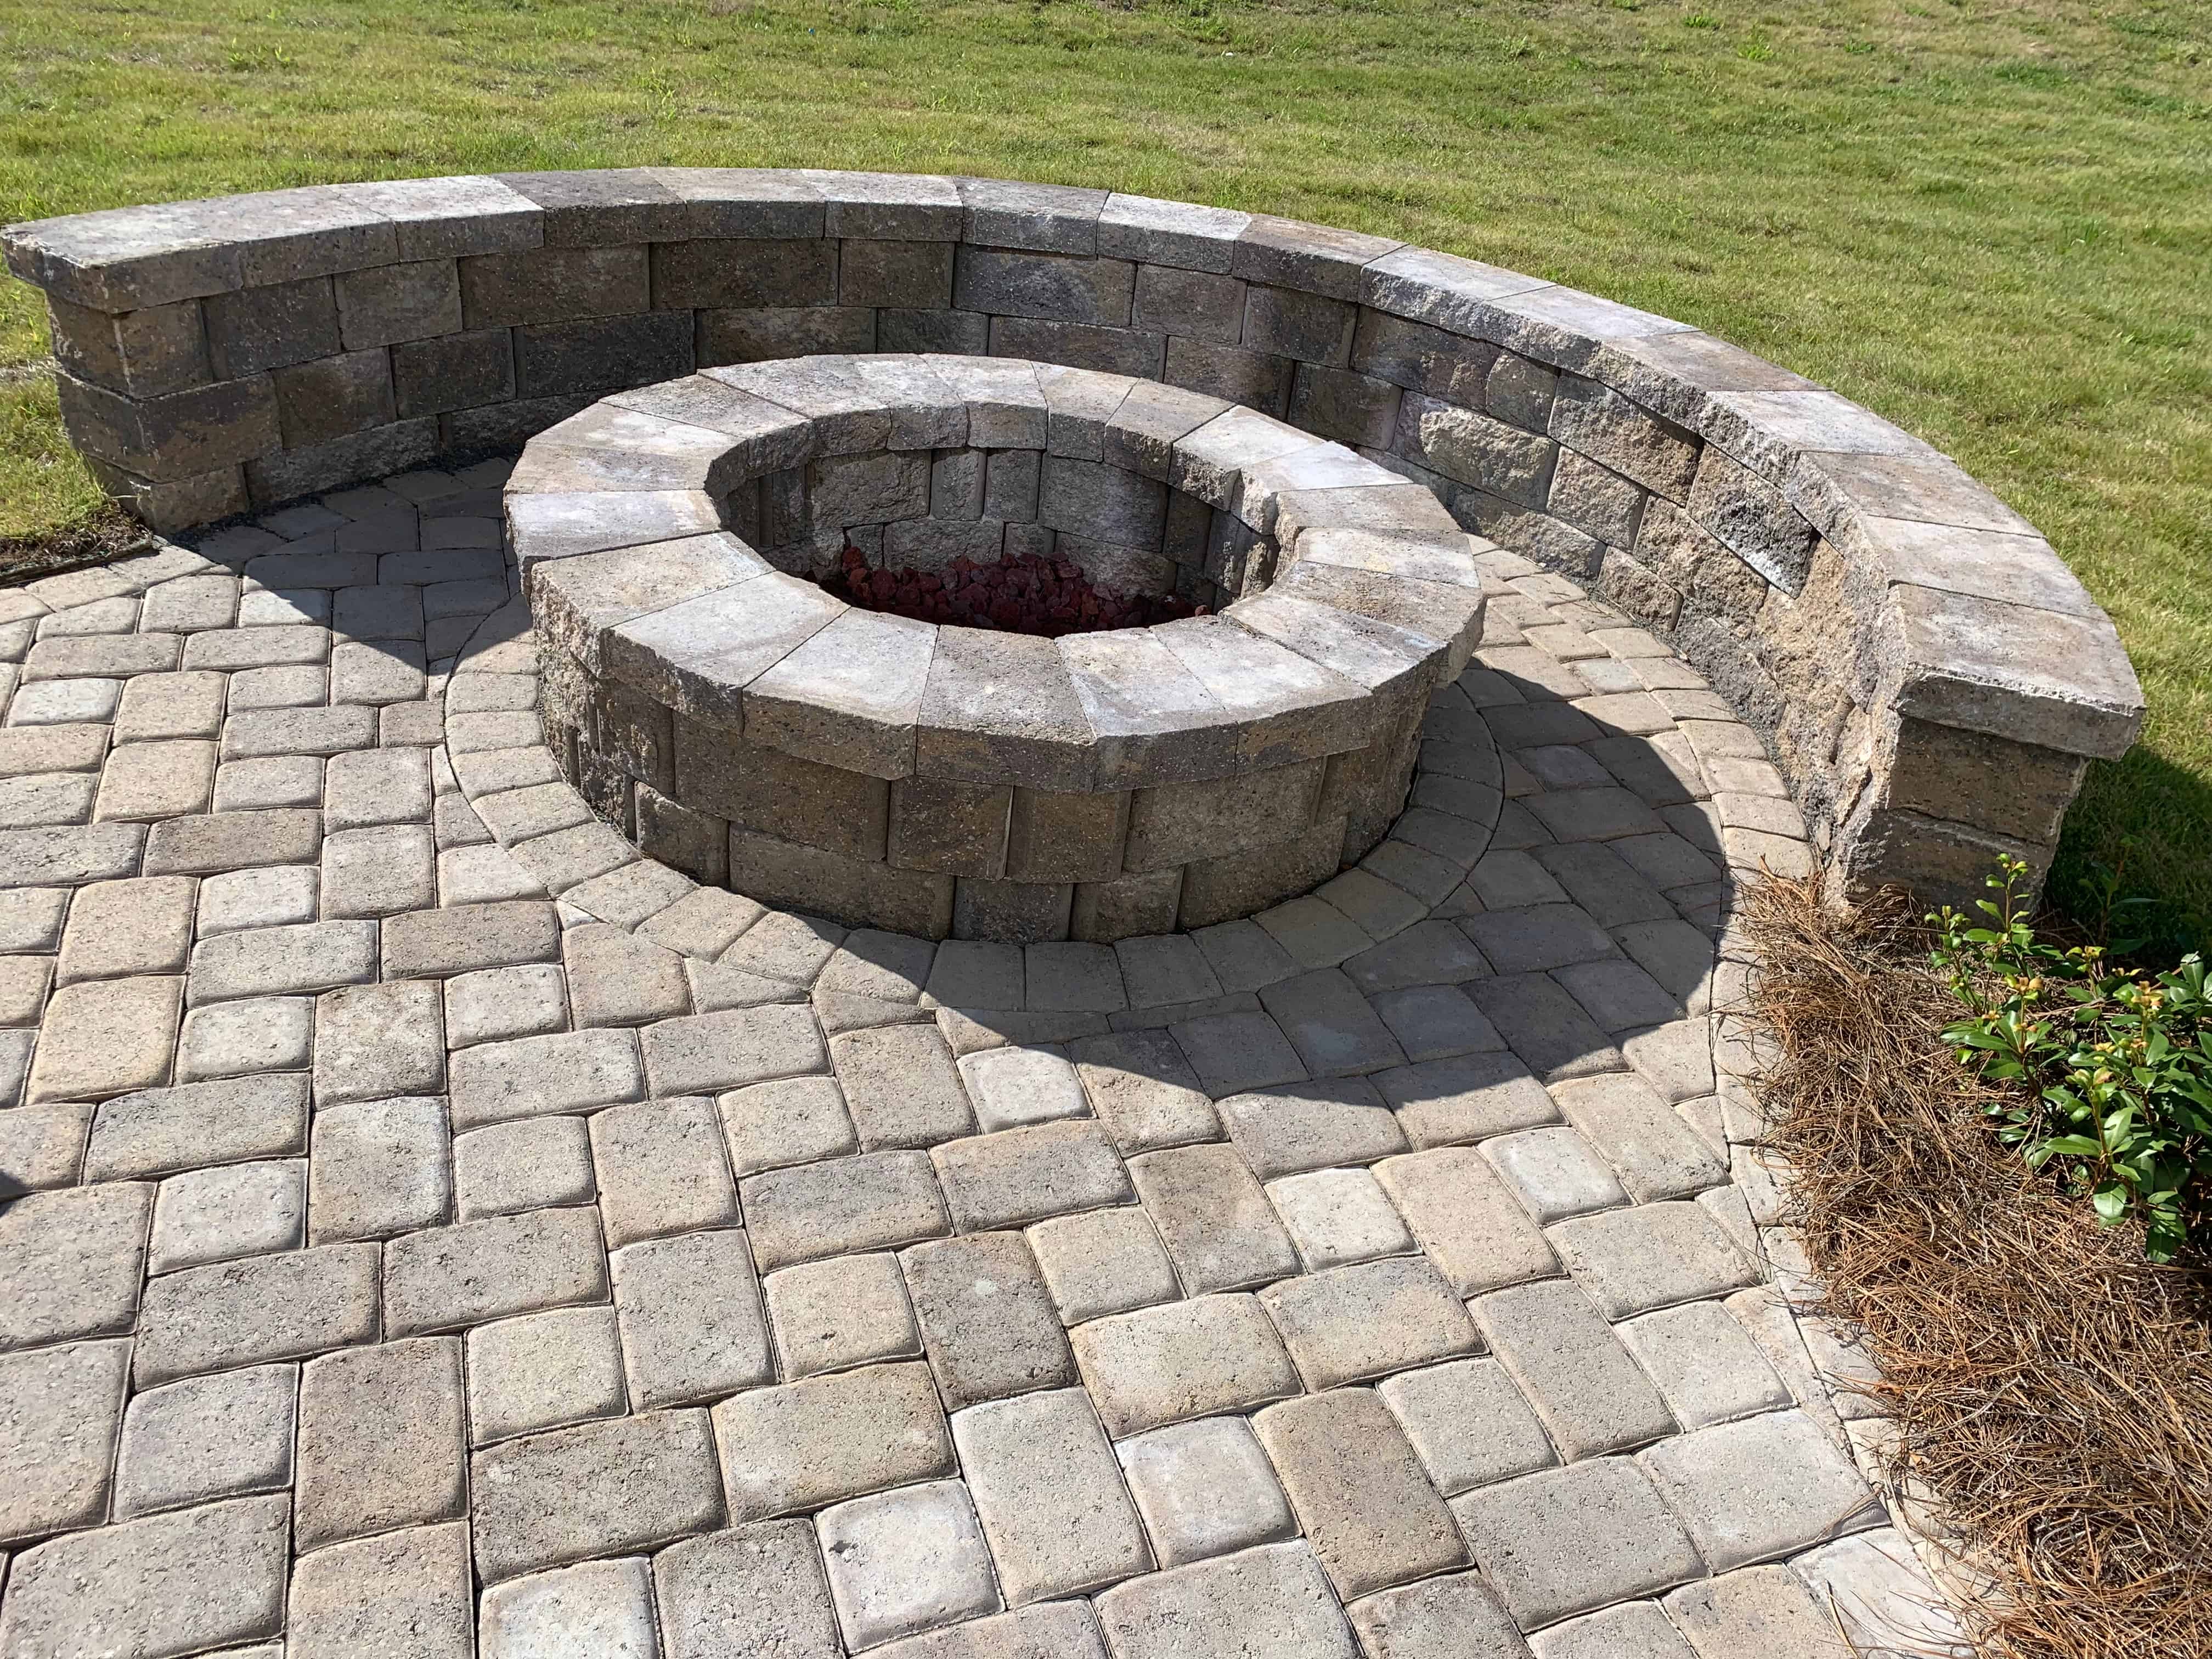 Explore the best firepit ideas for large and small yards. Get inspired and make the most of your outdoor living area this fall.